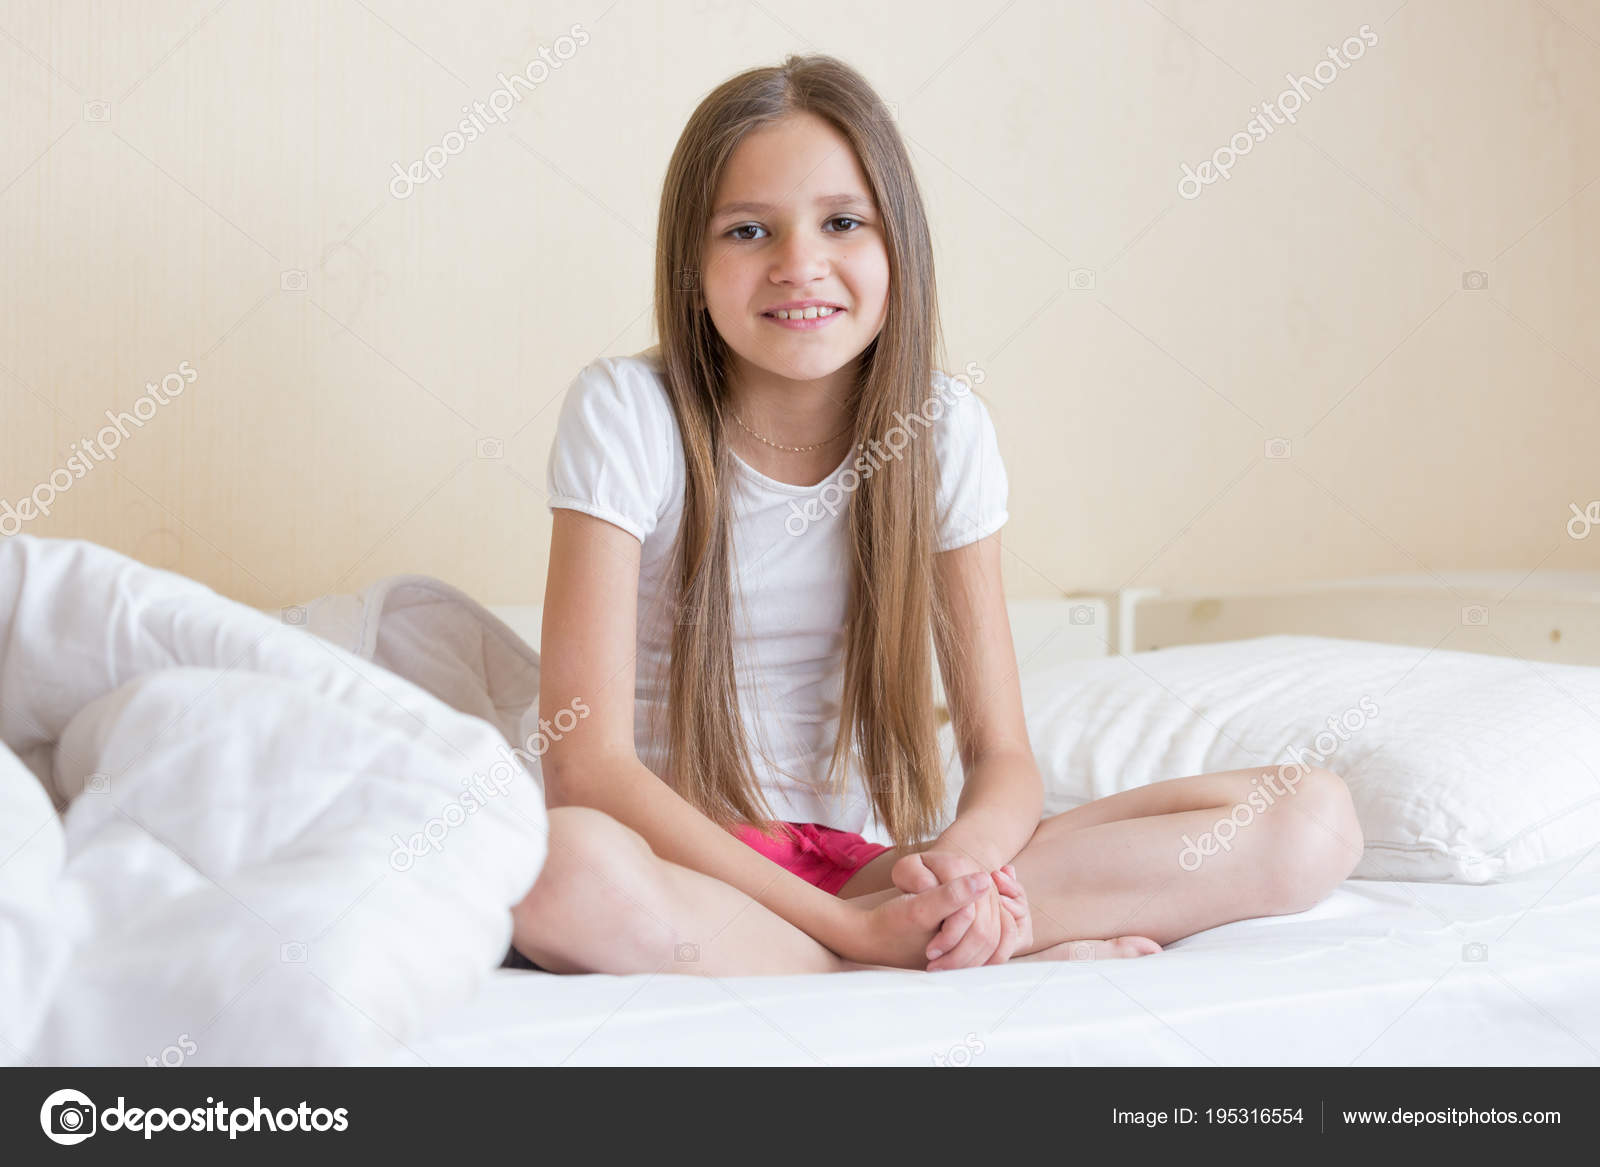 Beautiful 10 Year Old Girls Beautiful 10 Years Old Girl With Long Hair Sitting On Bed Stock Photo C Kryzhov